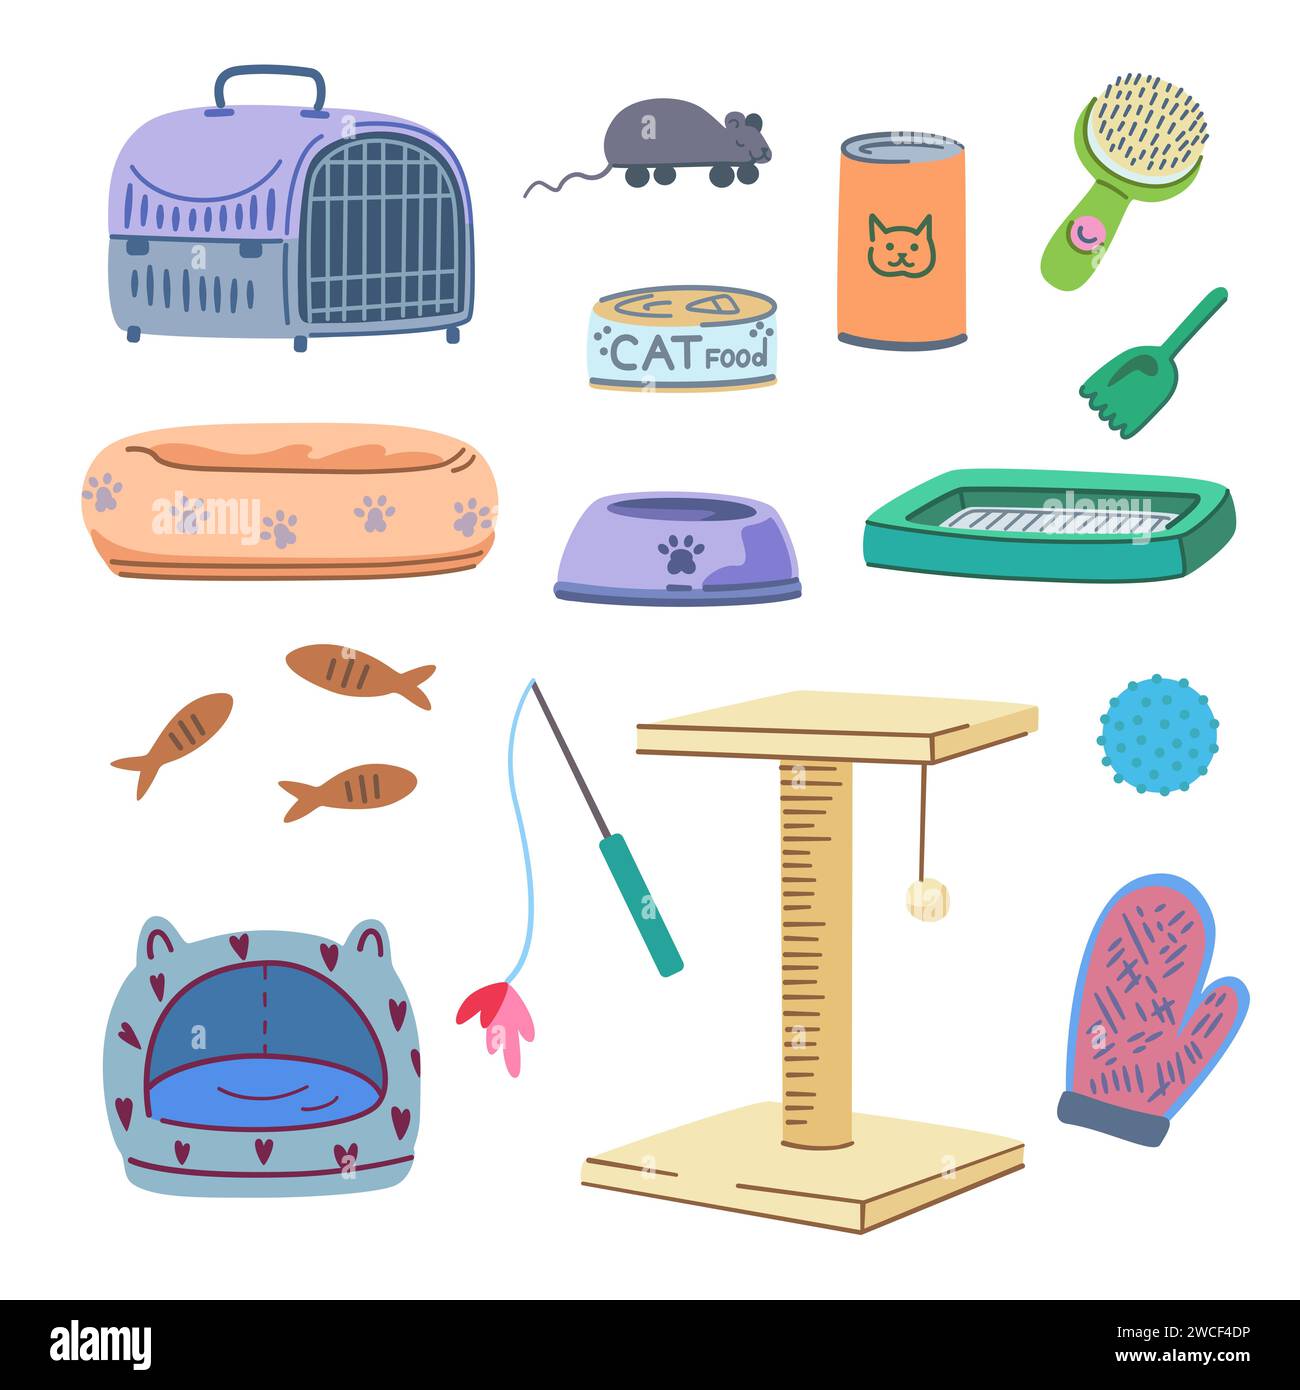 Set of pet supplies. Elements of cat grooming elements, food, toys, cages, beds. Vector illustration. Stock Vector